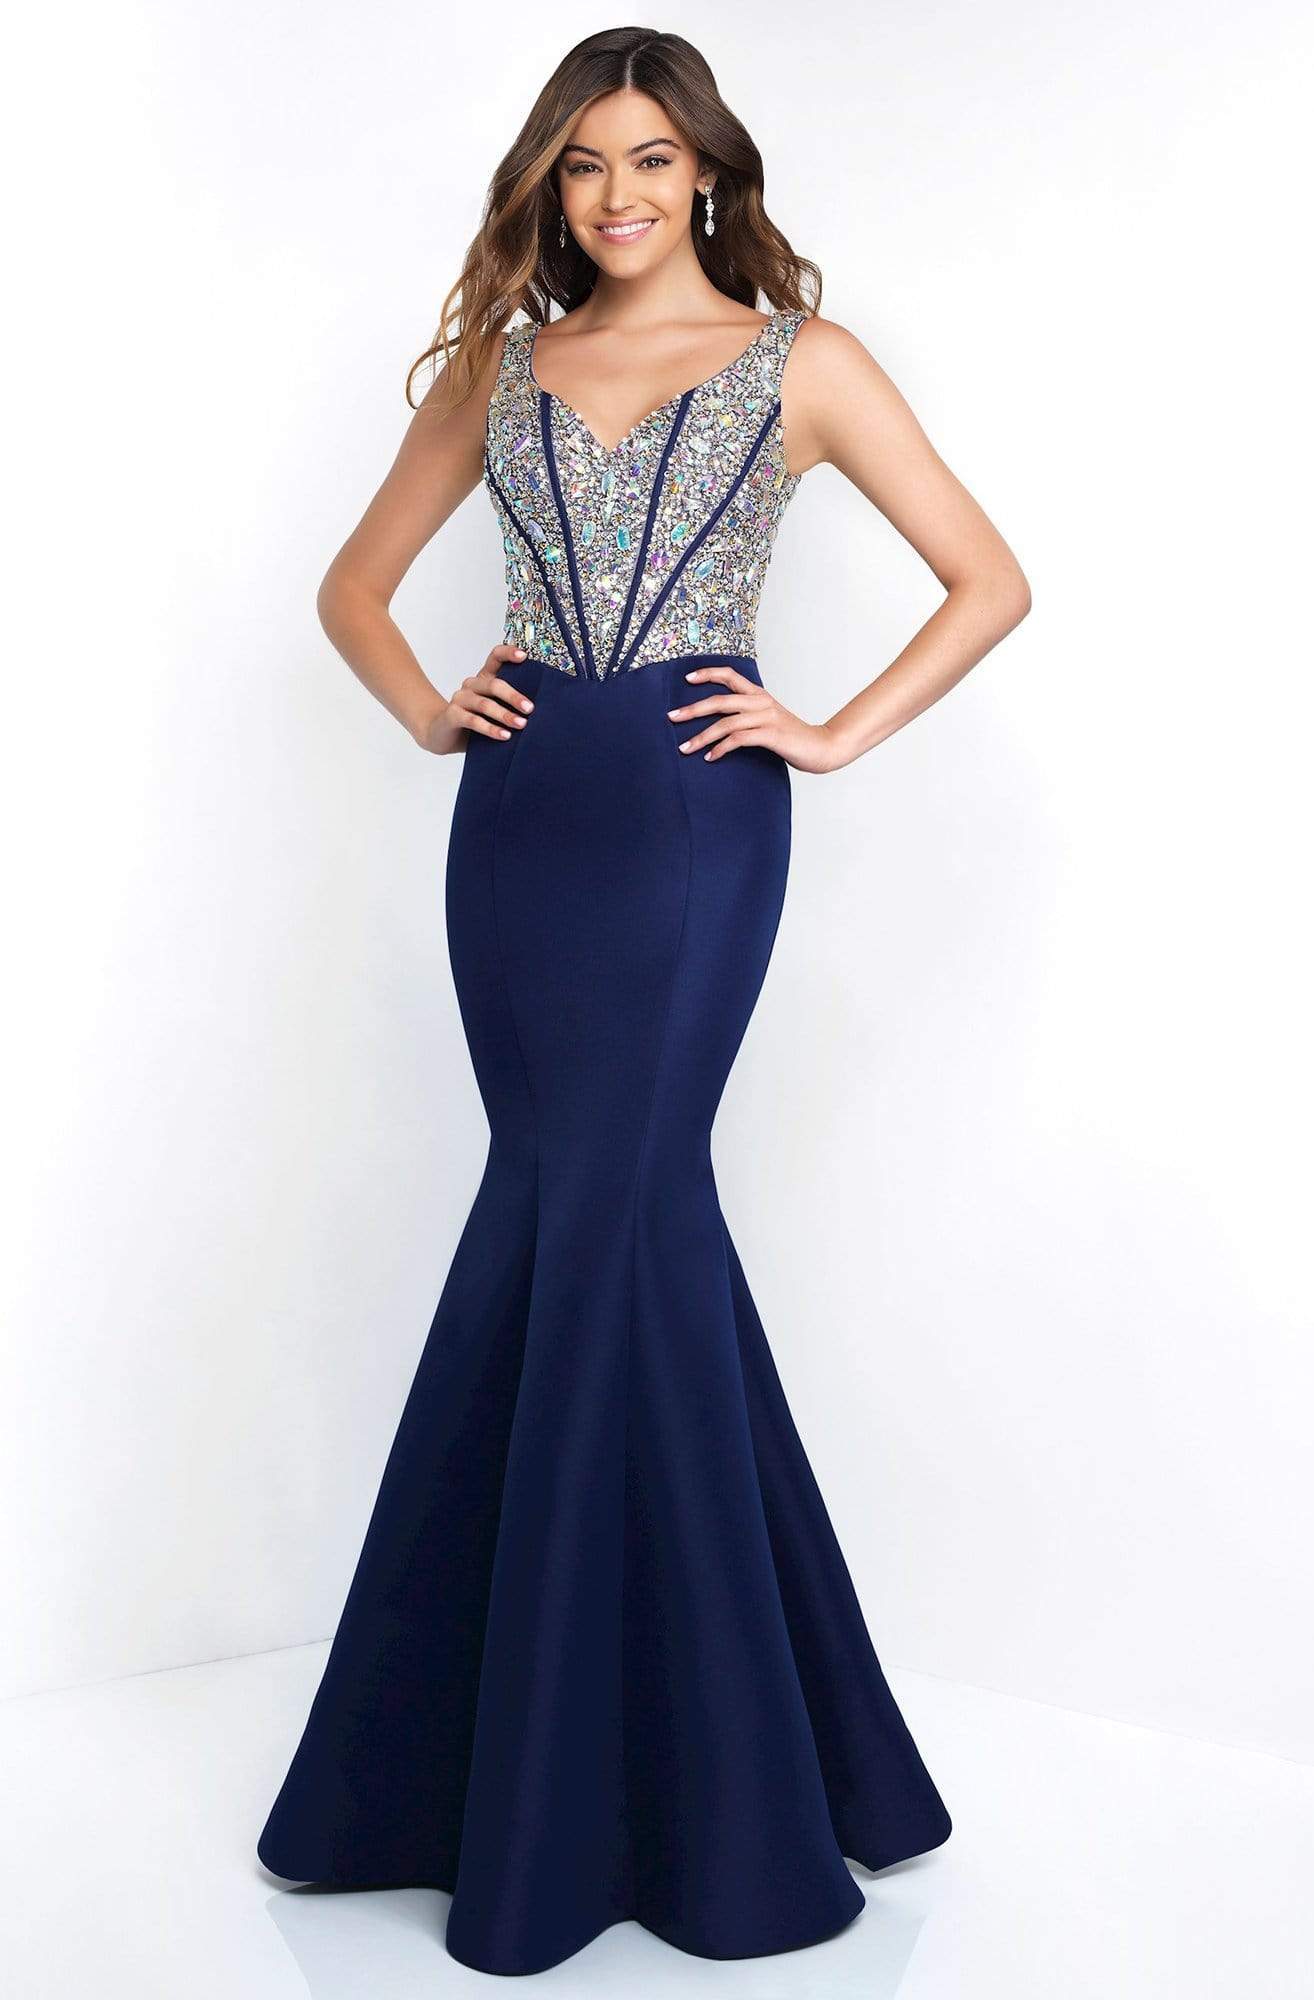 Blush - C1086 Sleeveless Crystal Beaded Mikado Evening Gown Special Occasion Dress 0 / Navy